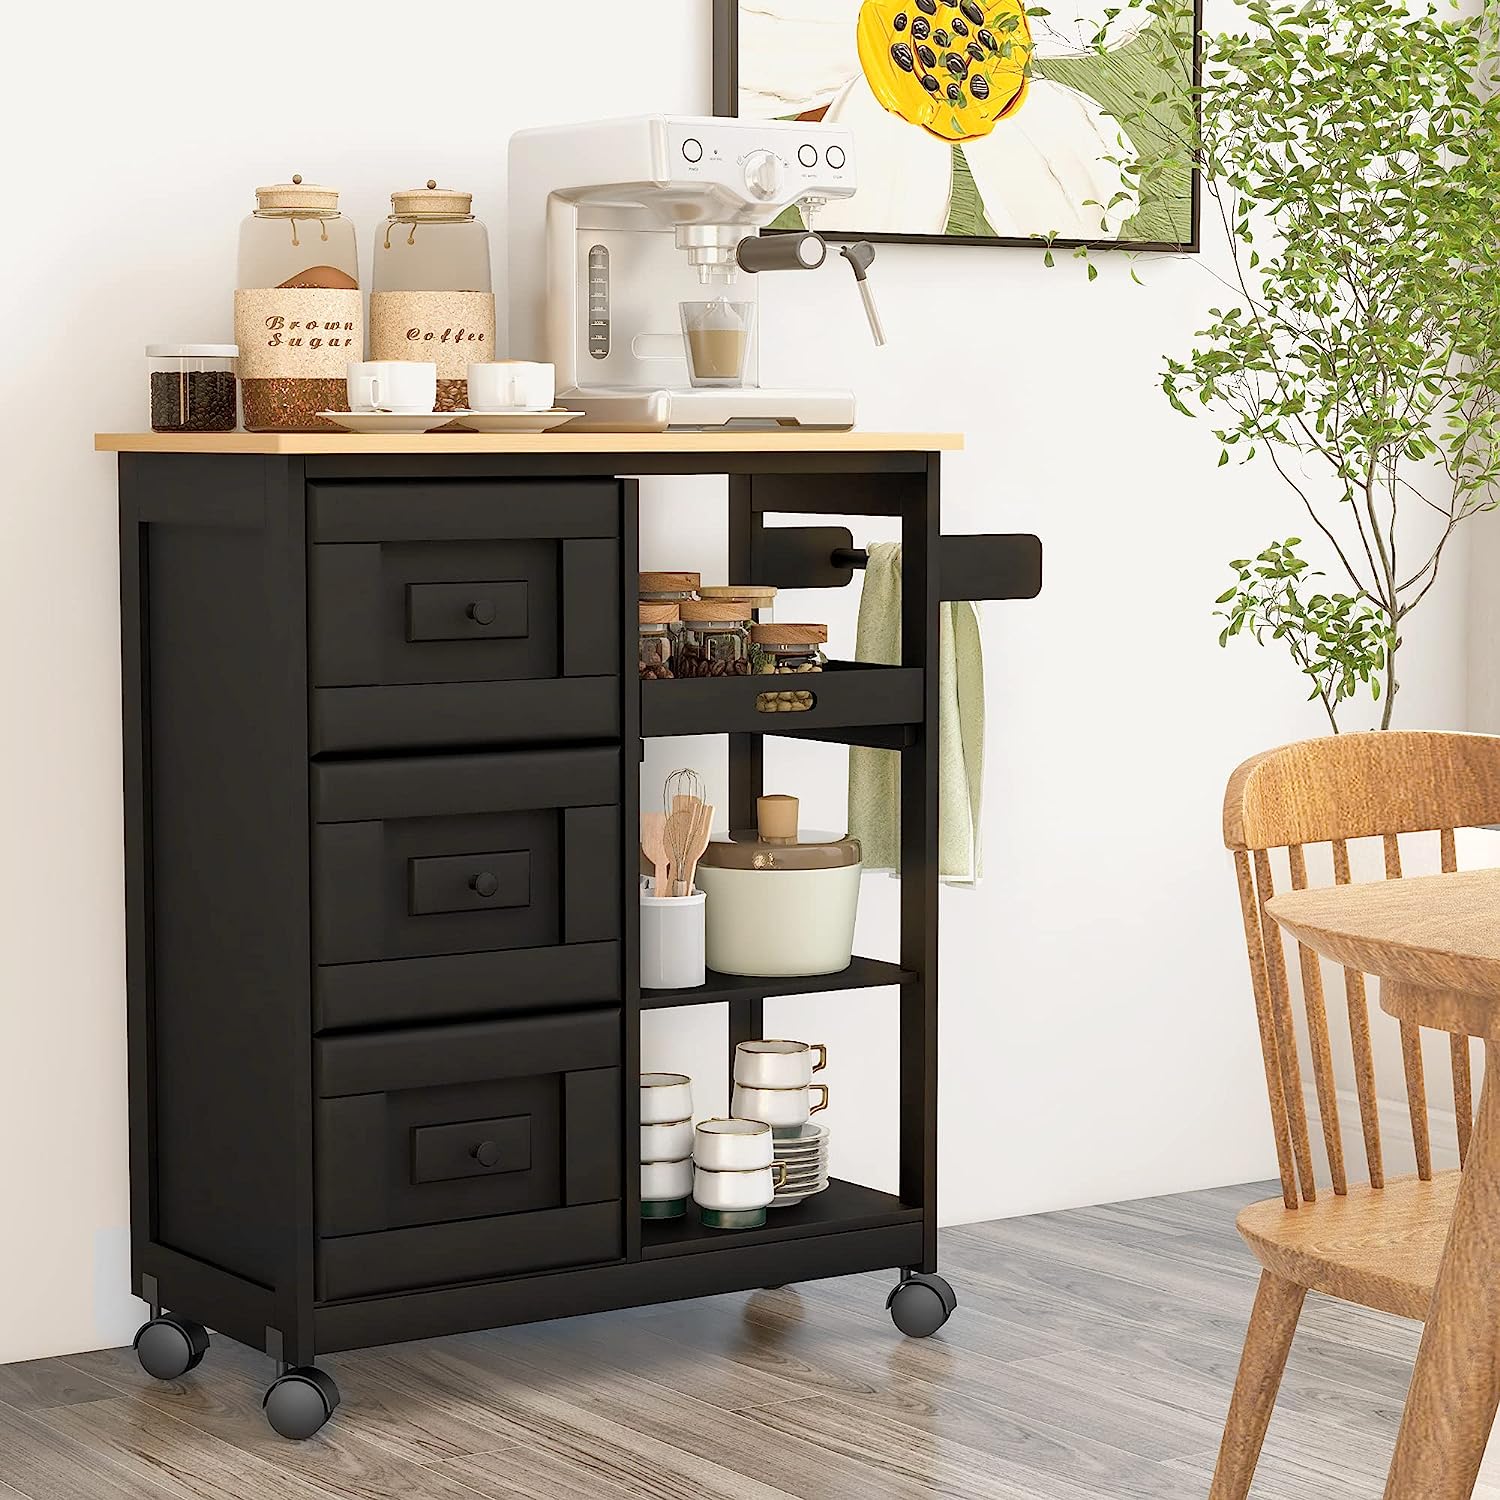 kitchen-islands-with-open-shelves-black